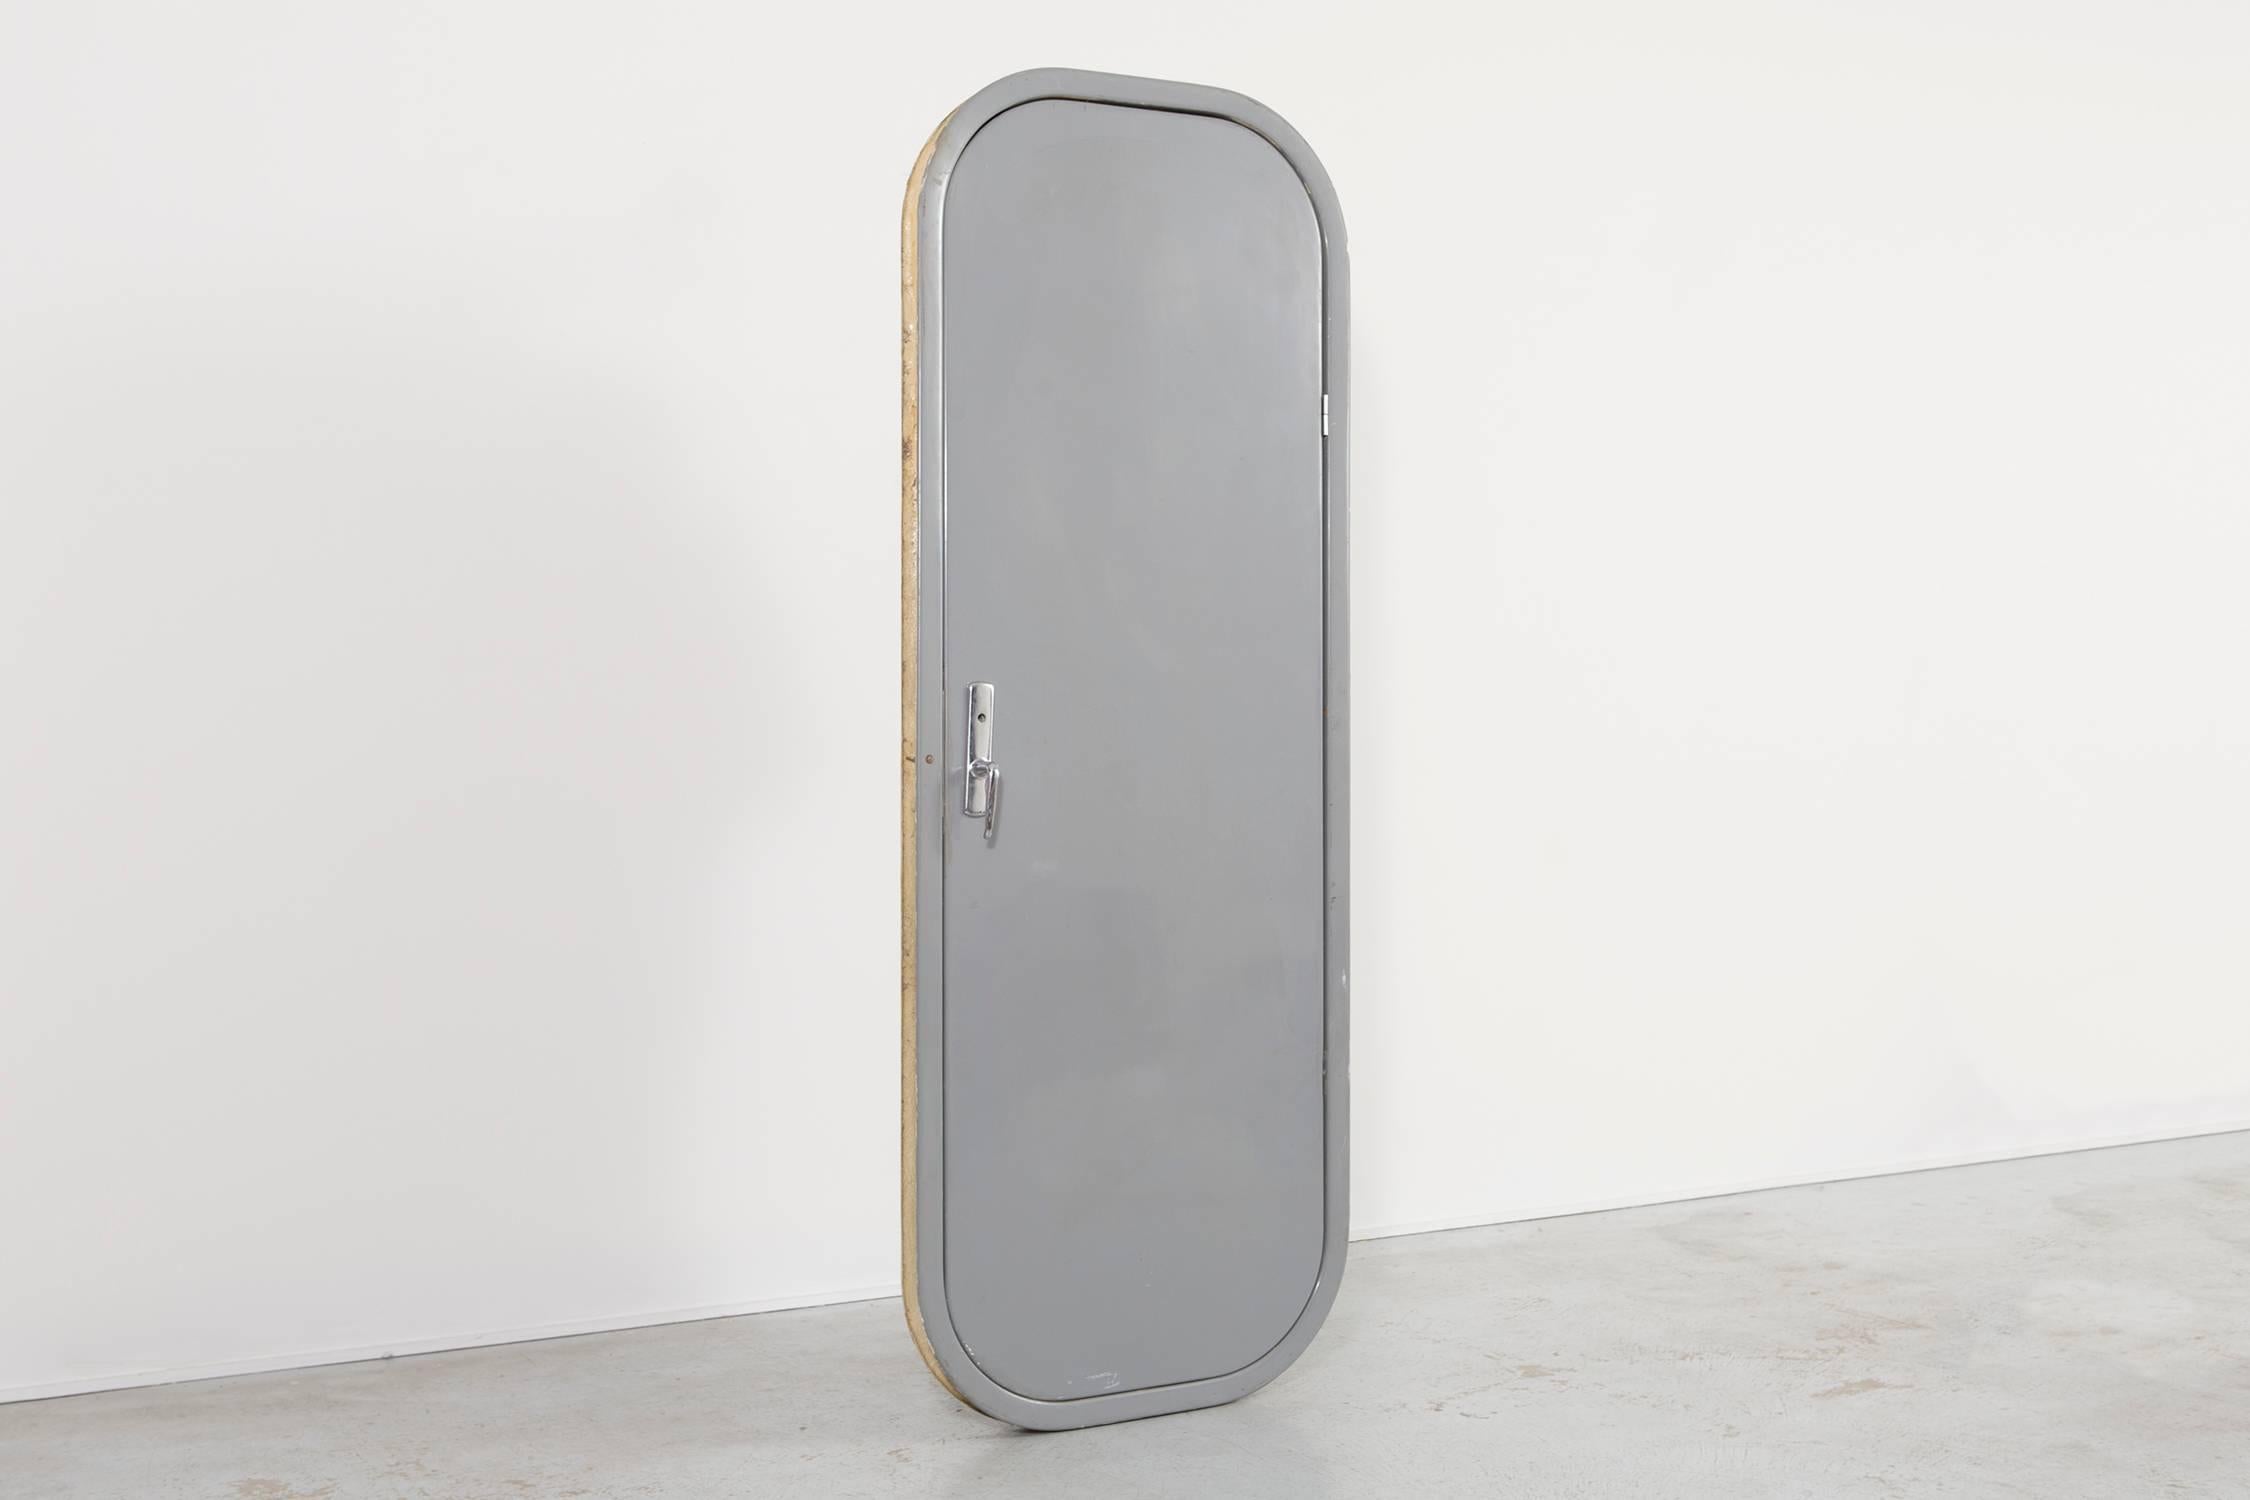 Door

Designed by Charlotte Perriand for Les Arcs

France, circa 1967

Lacquered wood and fiberglass

Measure: 76 ½